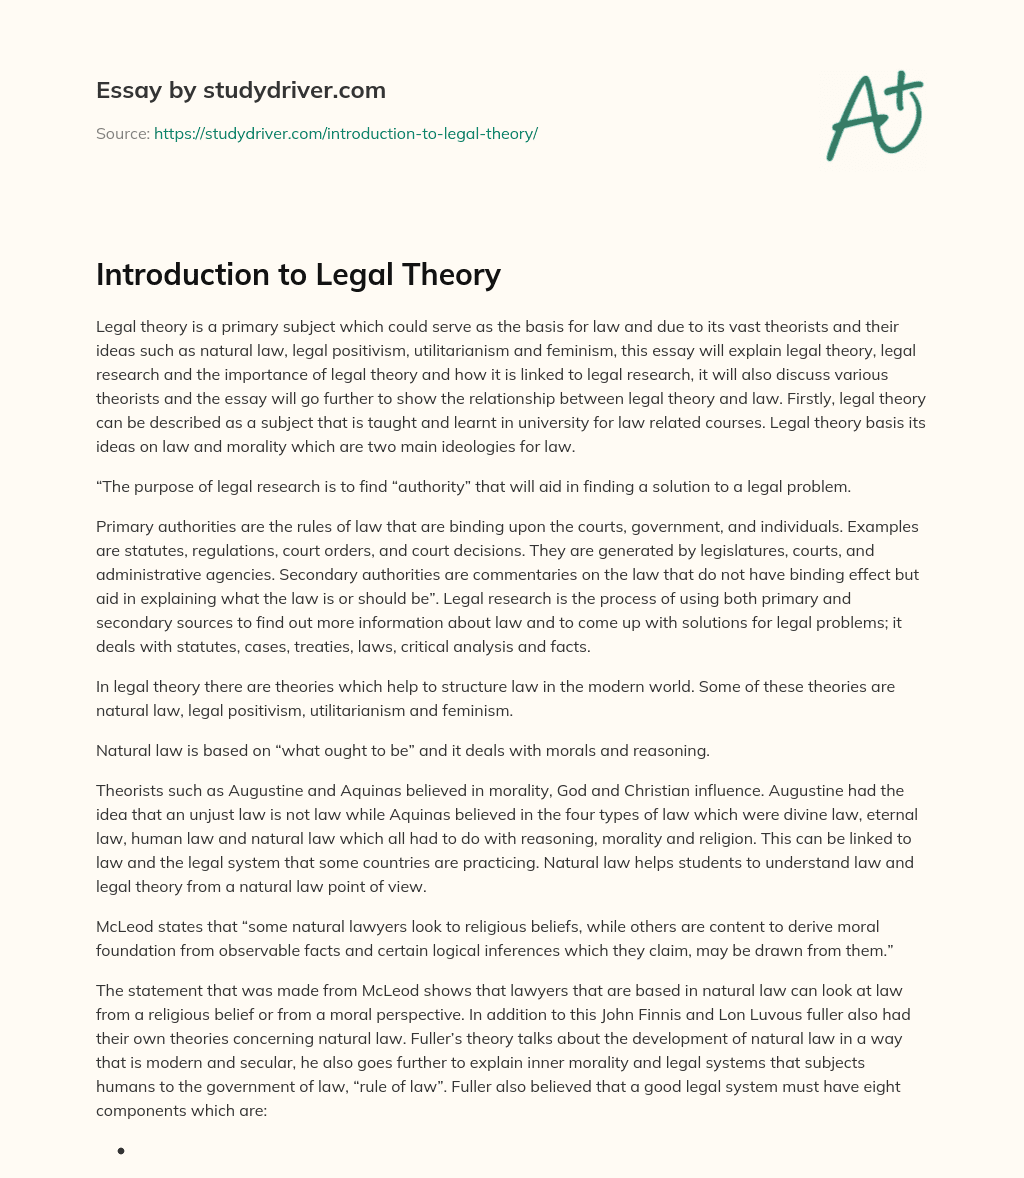 Introduction to Legal Theory essay